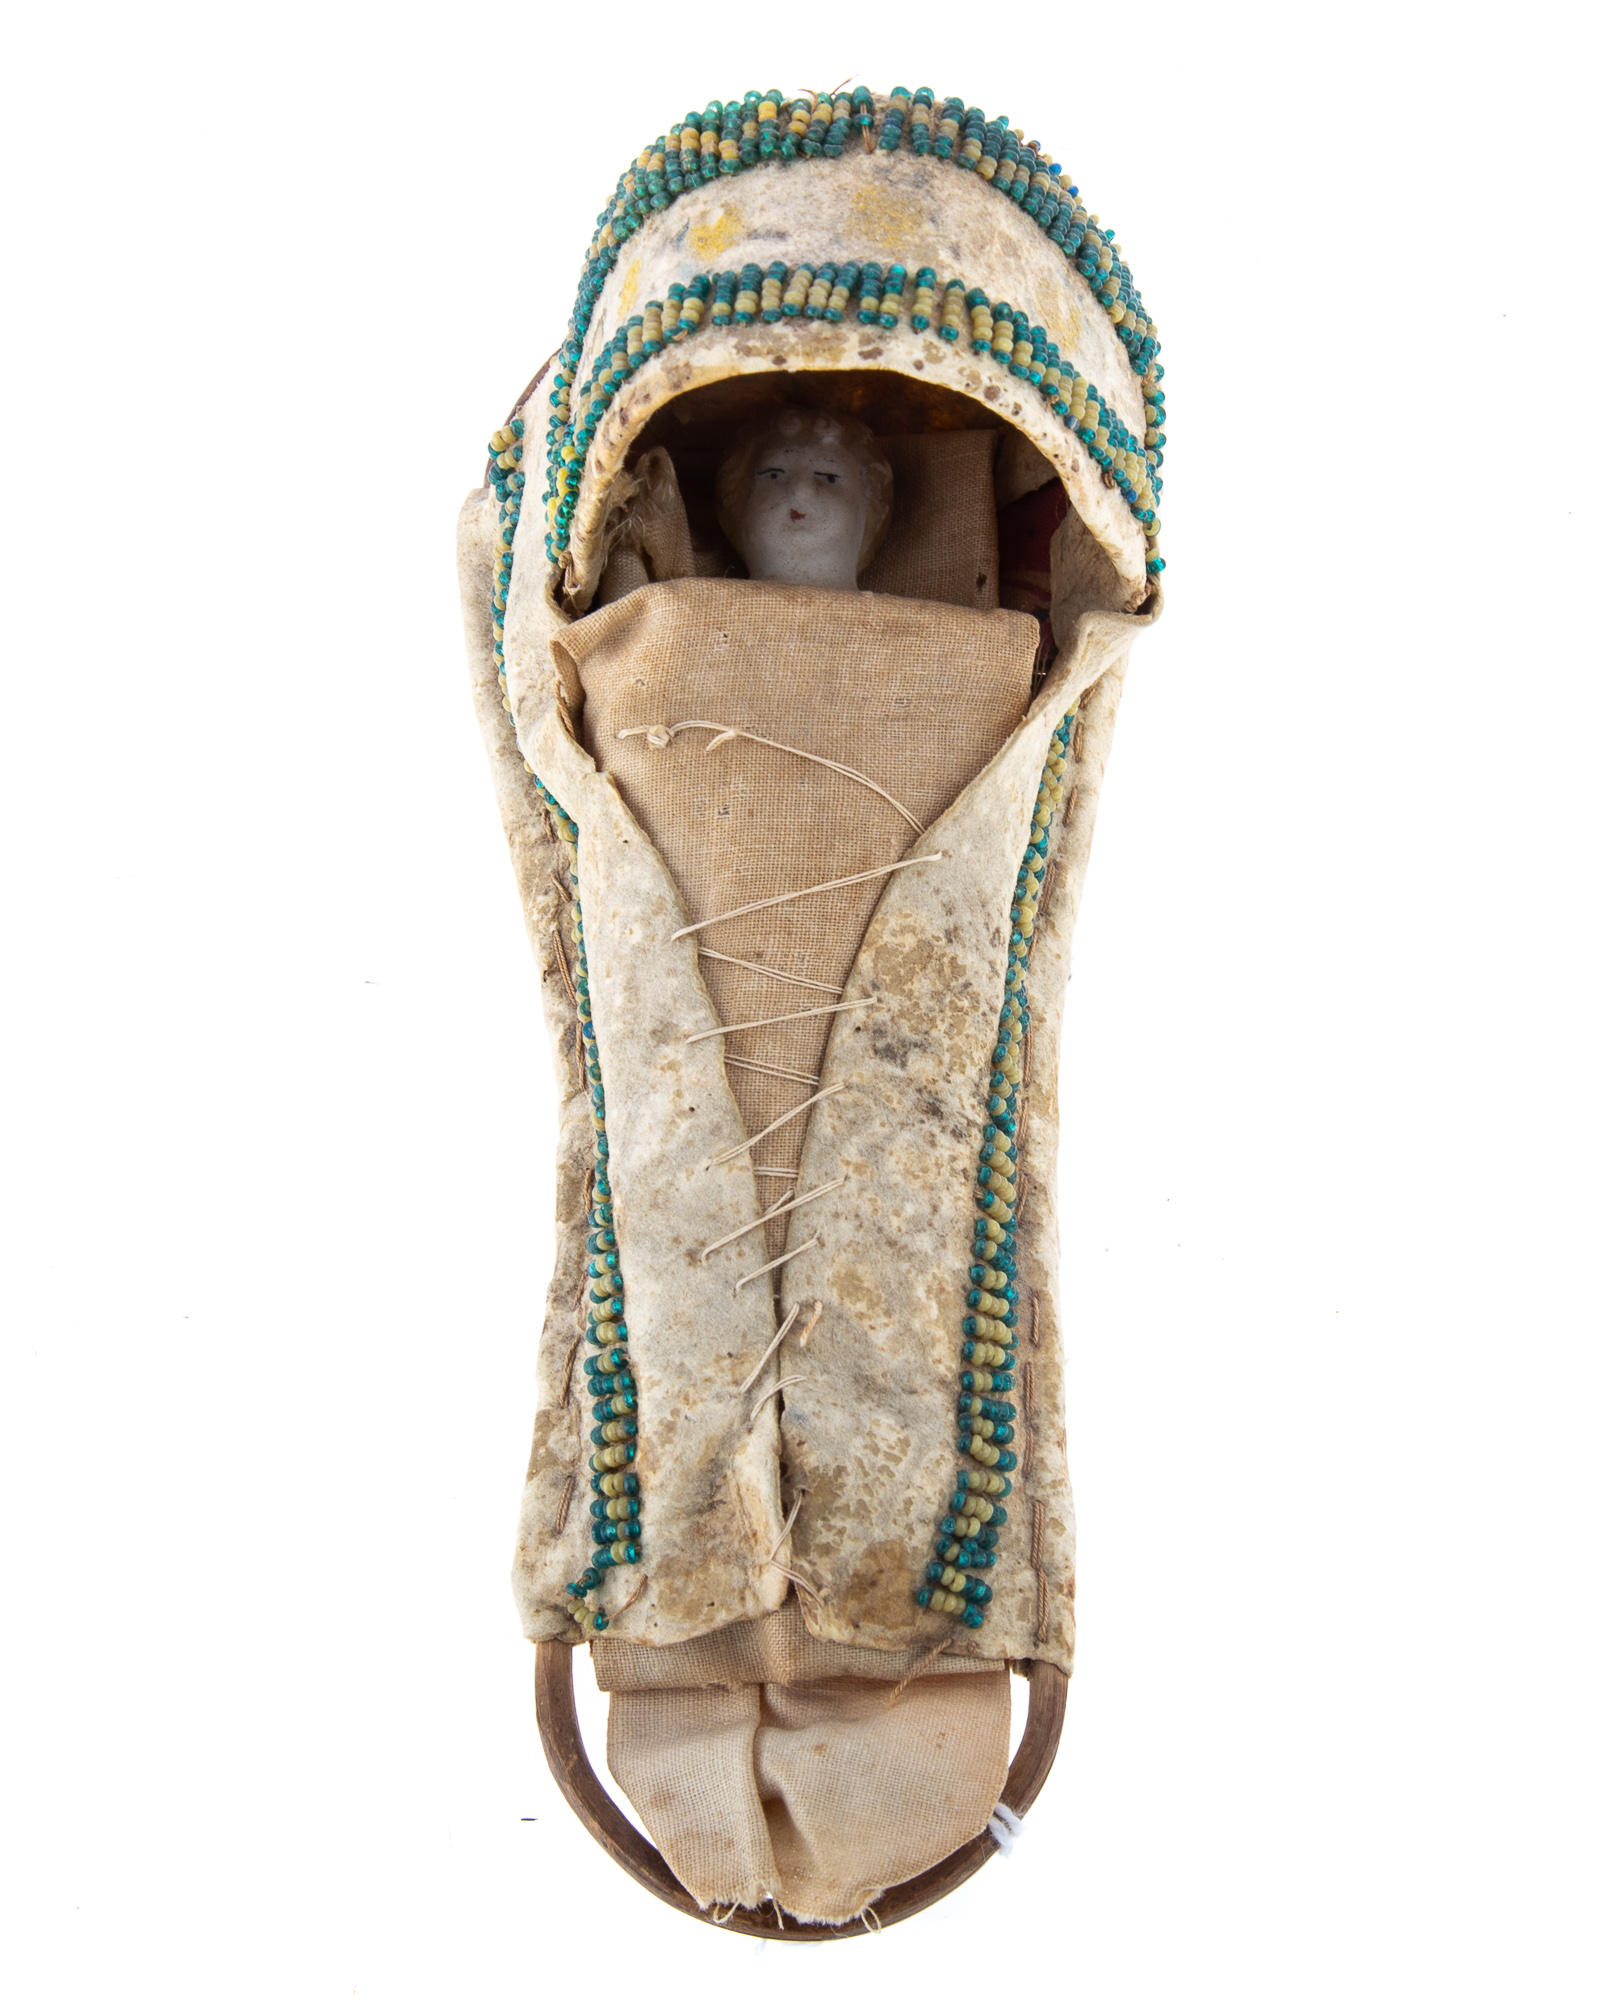 NATIVE AMERICAN MODEL OF A PAPOOSE